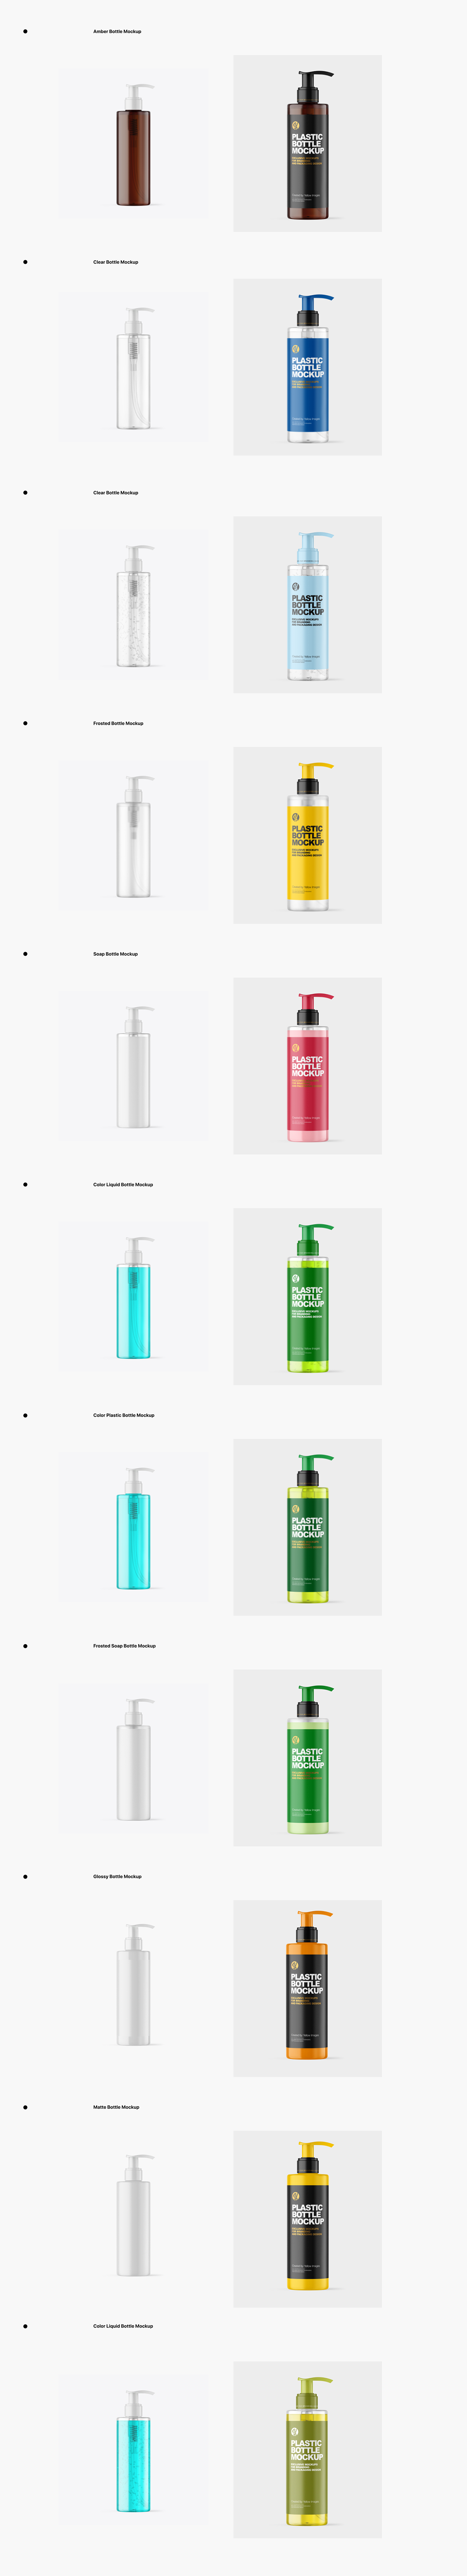 Download Psd Mockups Glitter Spray Can With Transparent Cap Yellowimages Yellowimages Mockups